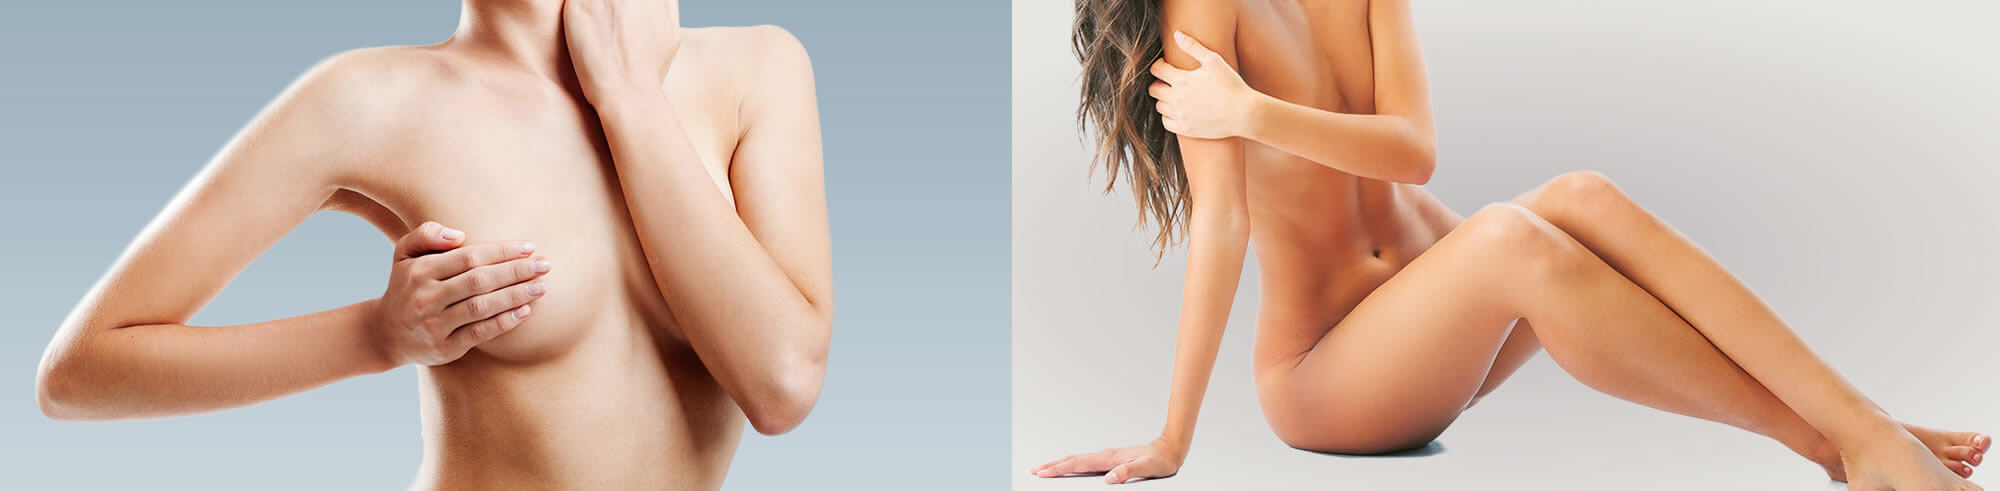 Liposuction And Breast Reduction